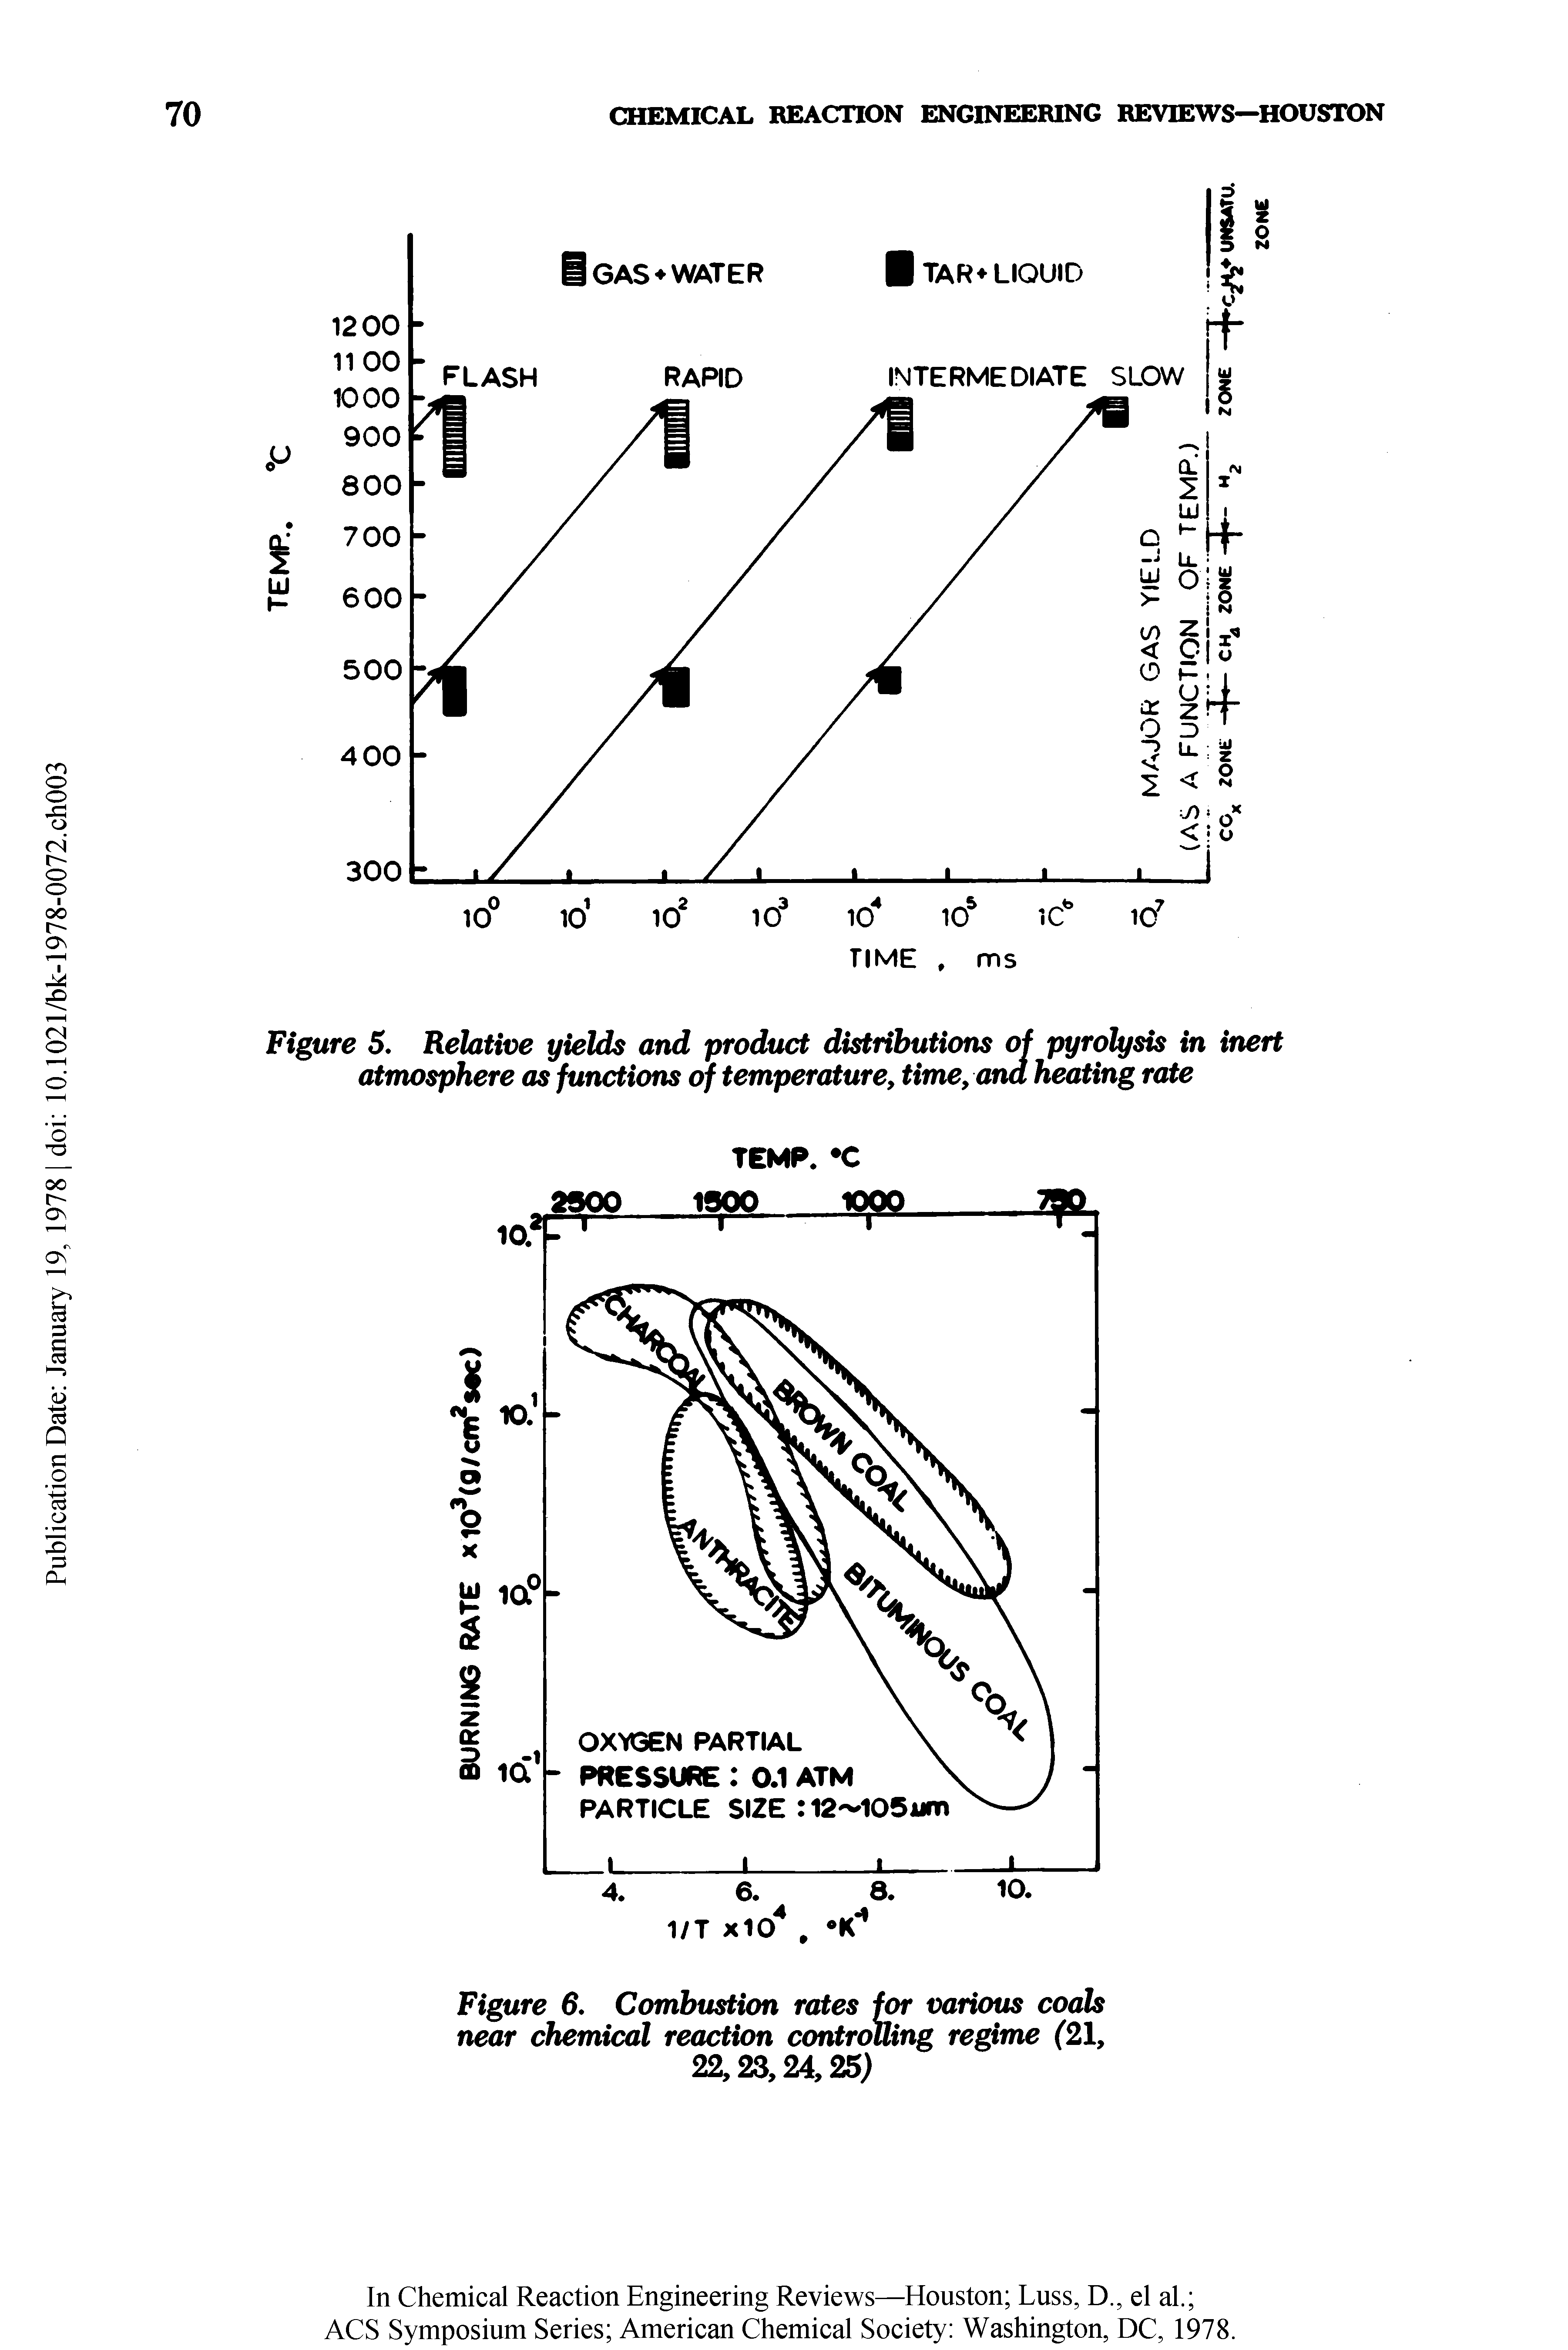 Figure 5. Relative yields and product distributions of pyrolysis in inert atmosphere as functions of temperature, time, and heating rate...